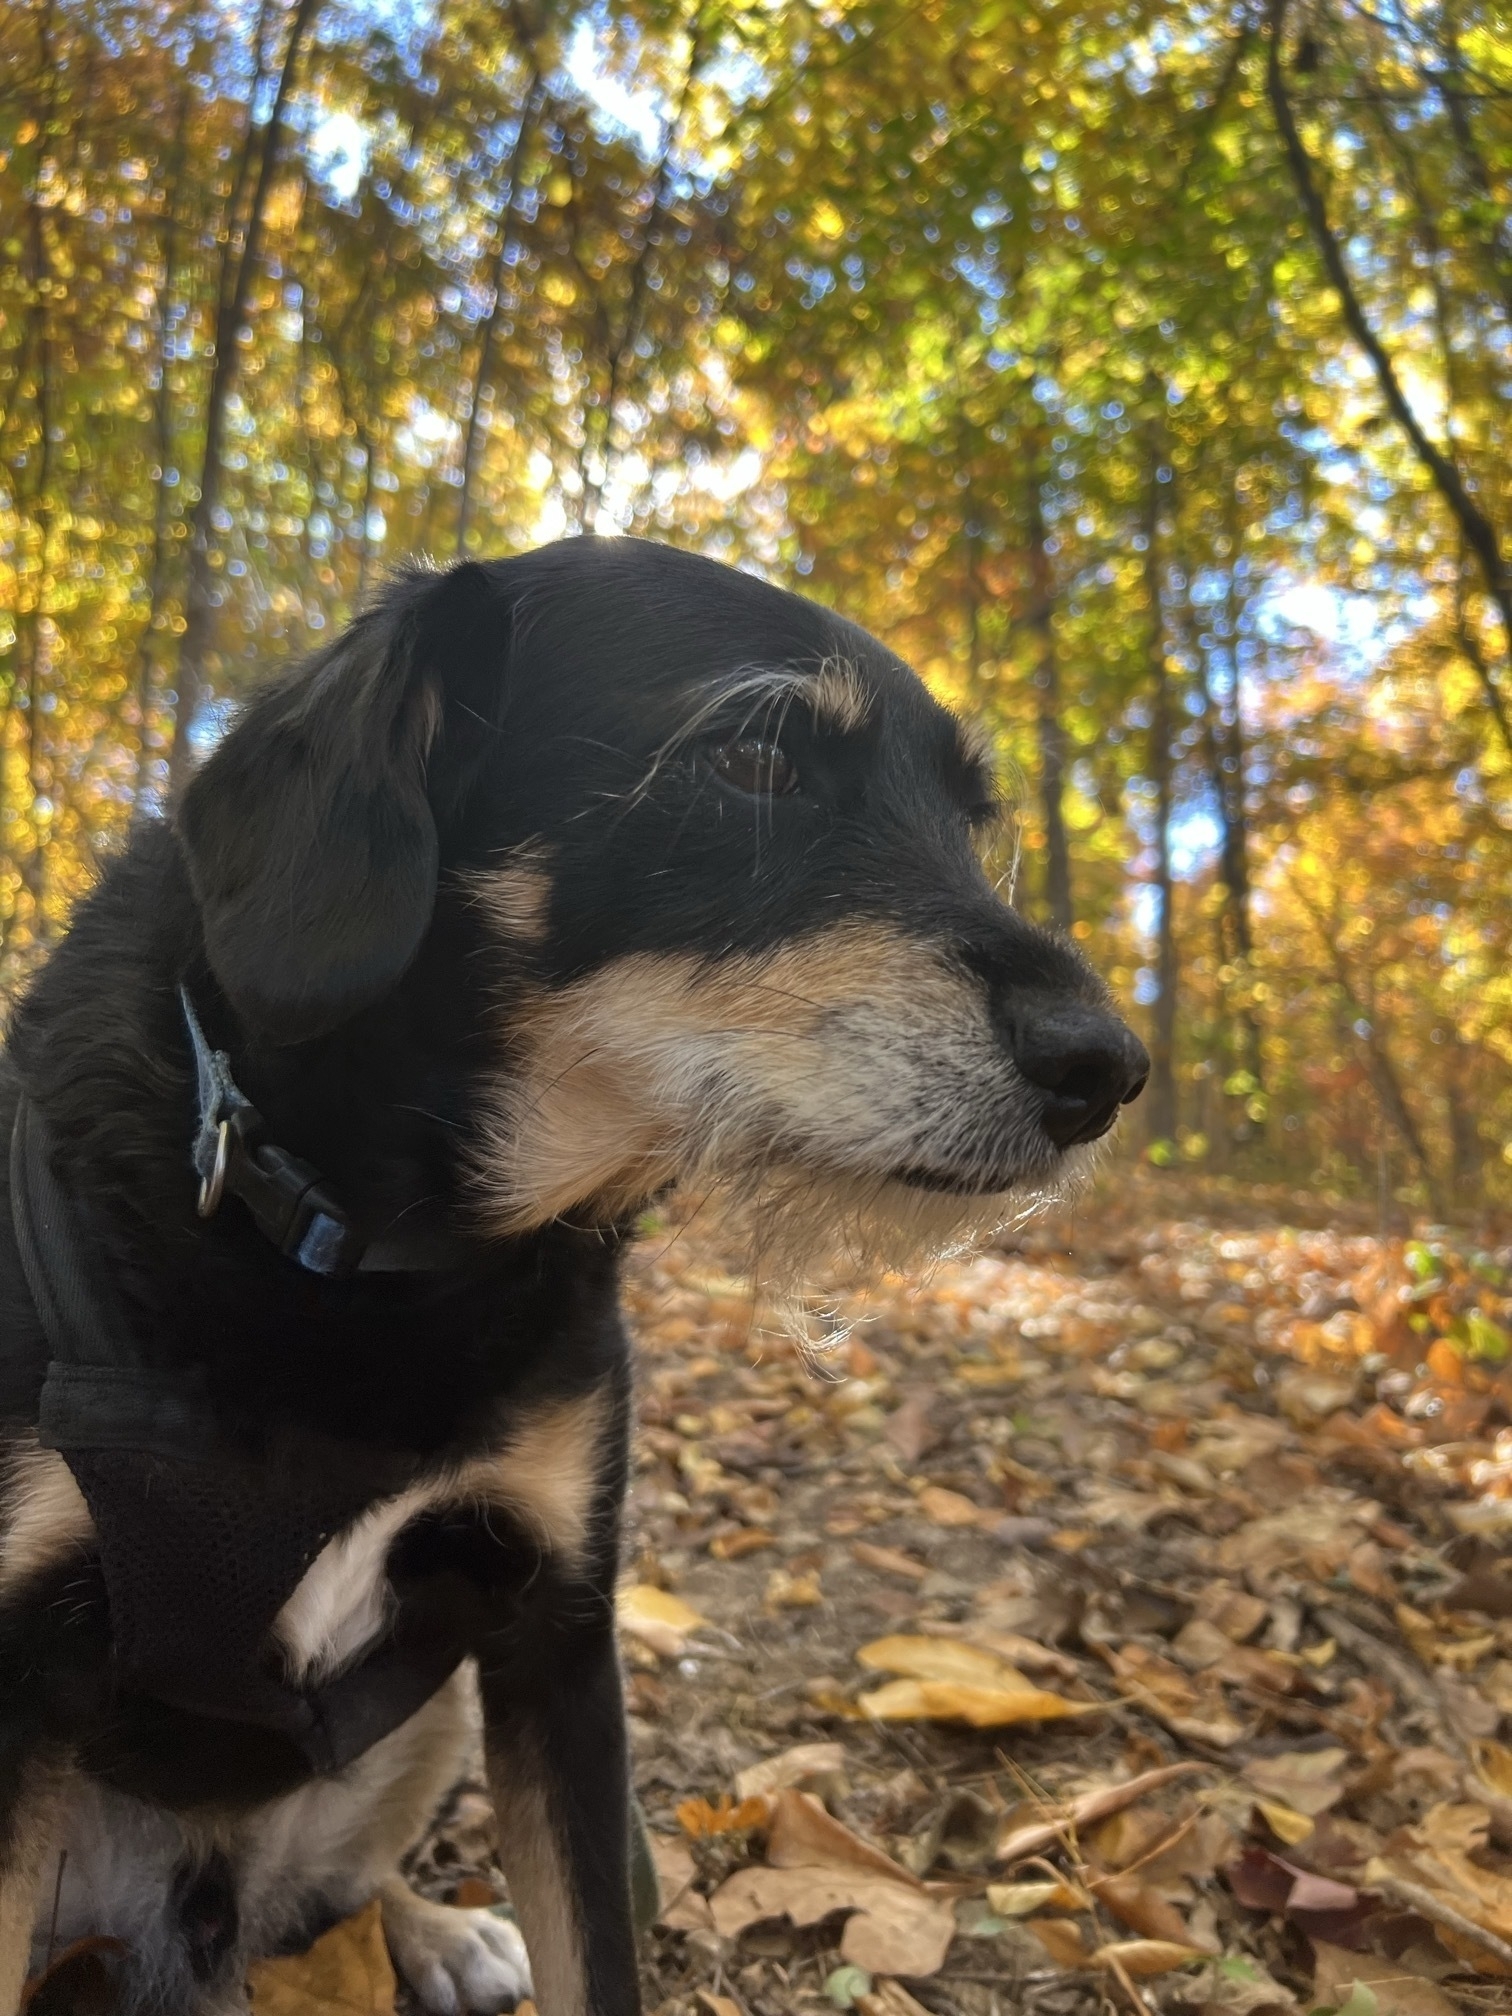 A black haired dog on a walk in the woods in the fall. The dog is sitting and looking away from the camera. The foliage and morning sun give the photo a golden tint.